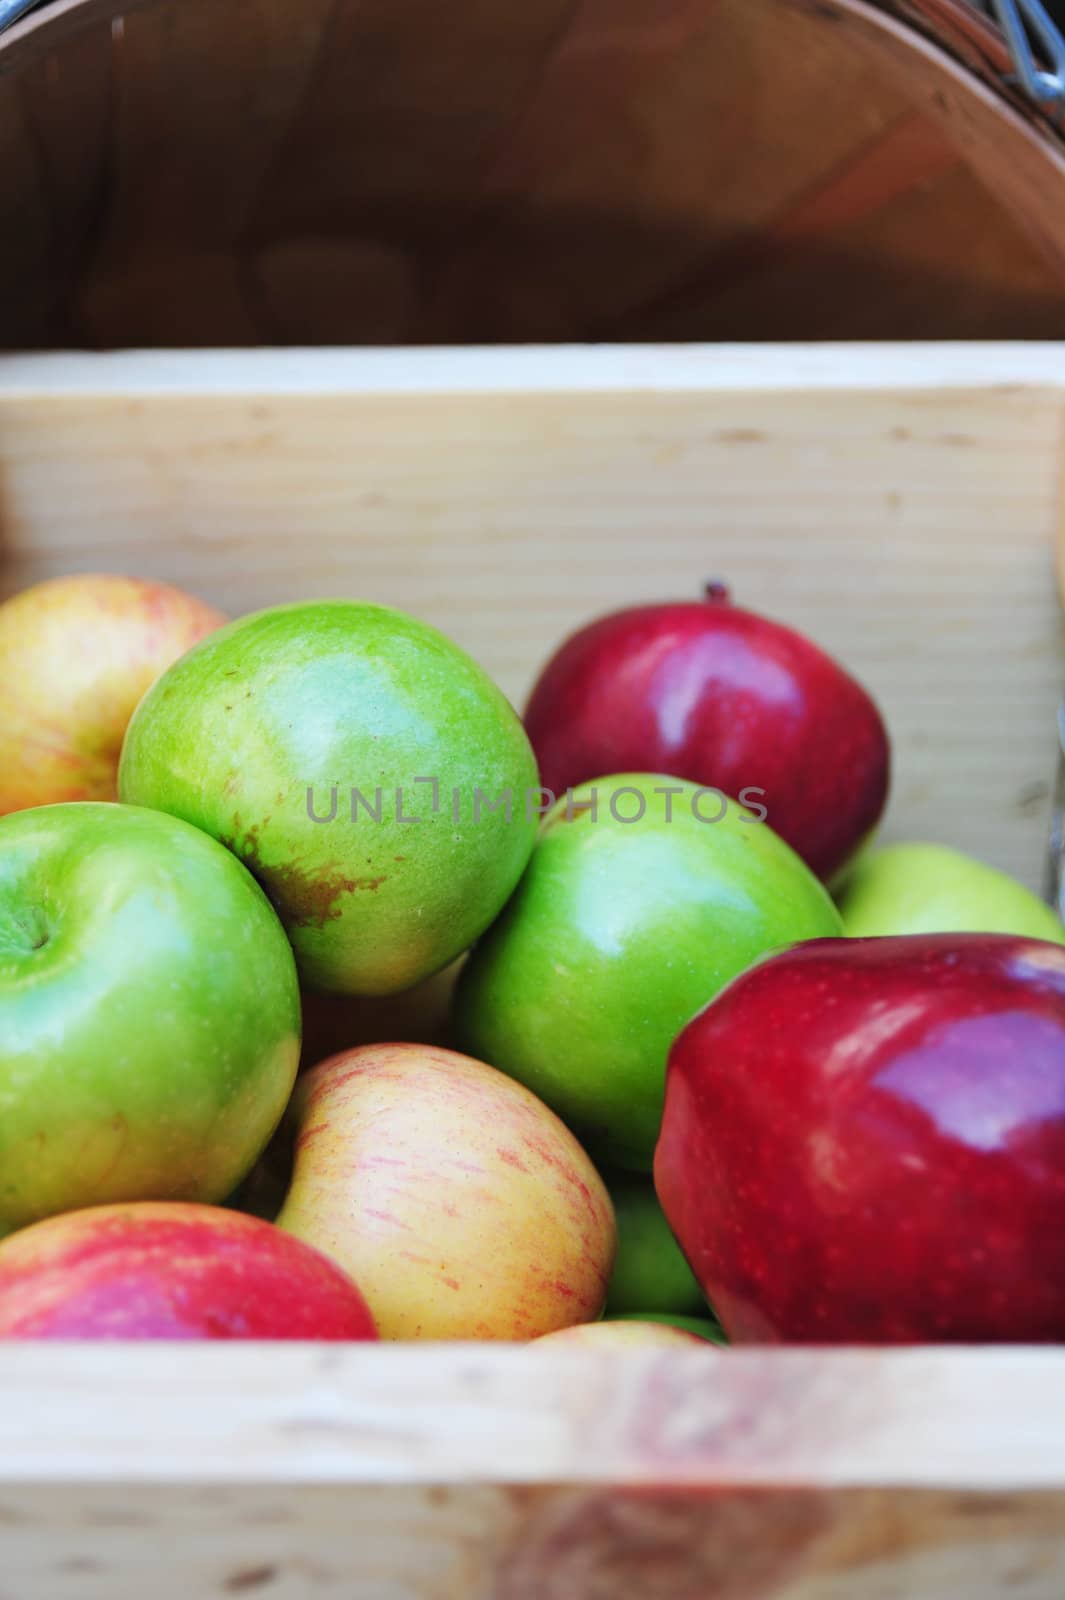 A wooden crate contains three different kinds of apples, Pippin, Red Delicious and Fuji.